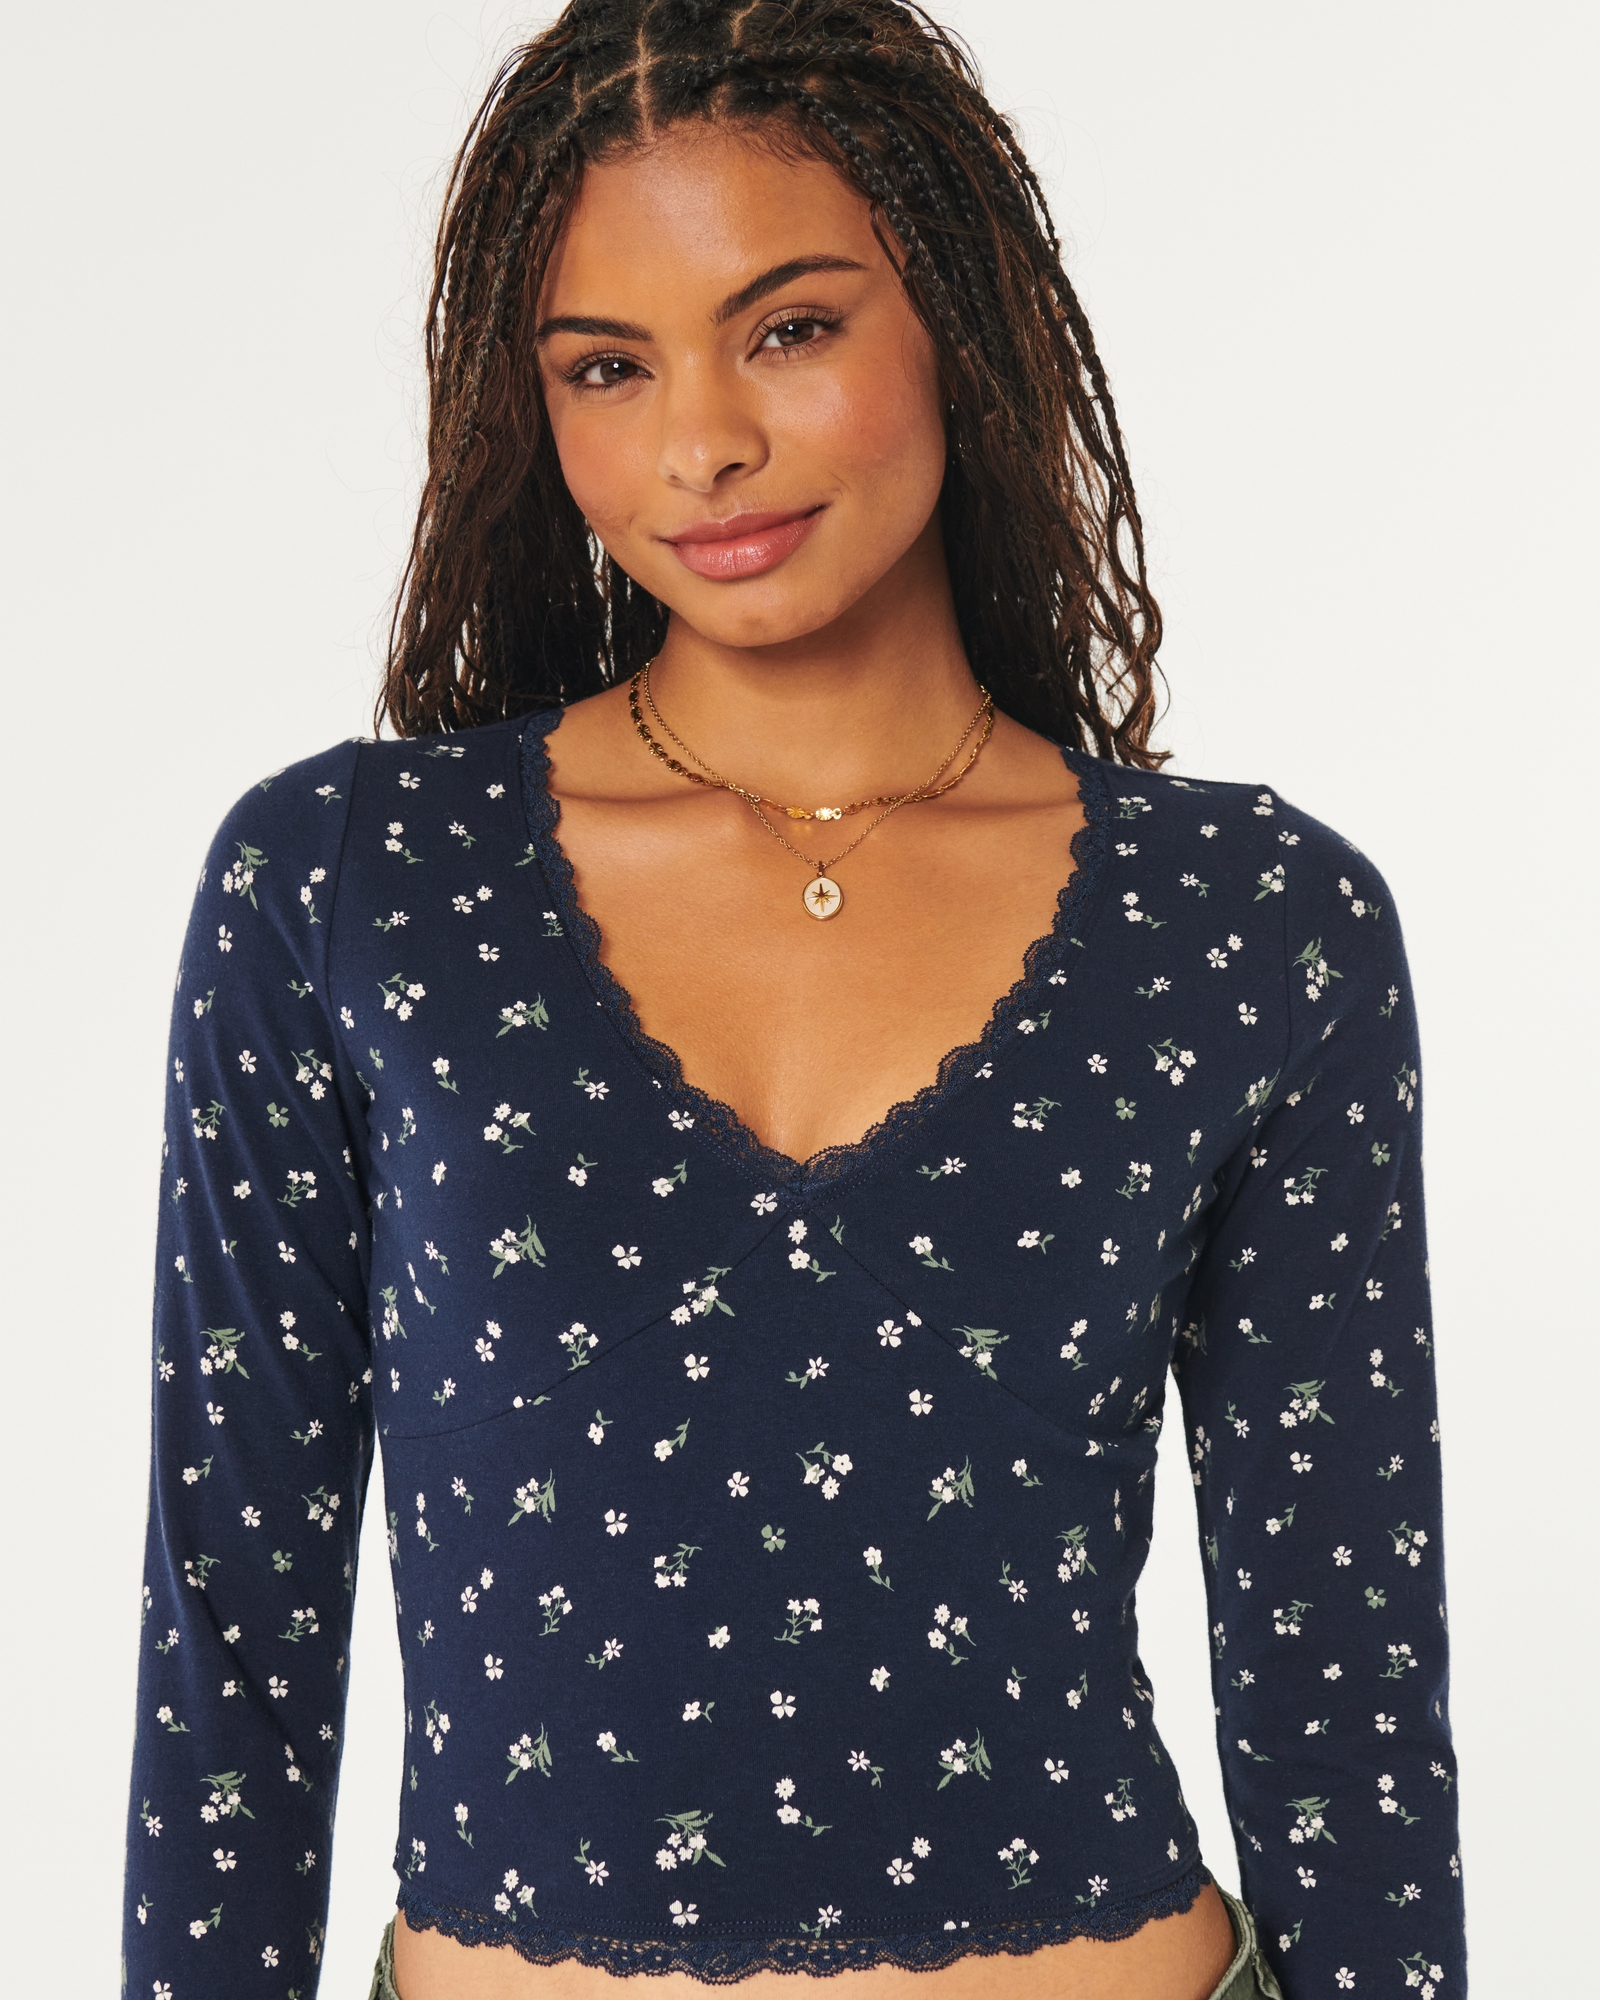 Hollister, Tops, Hollister Ladies Cold Shoulderblue Lace Long Sleeve Top  Us S